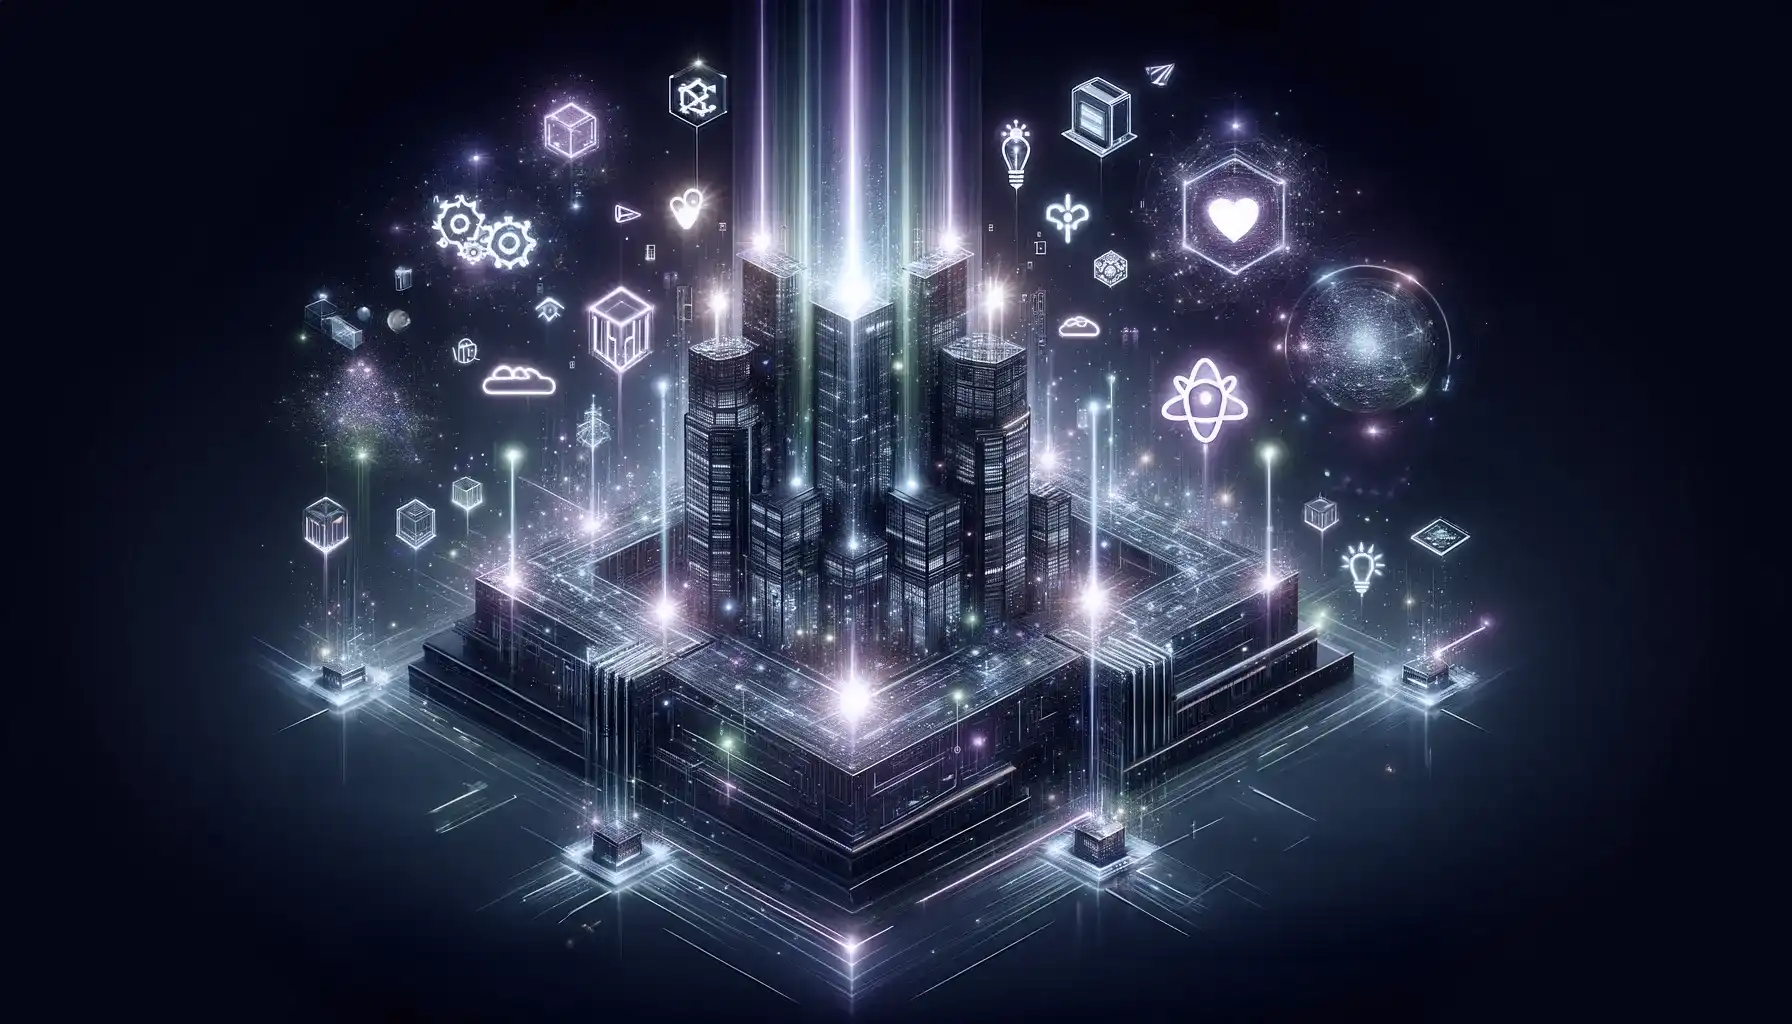 An abstract representation of a company’s digital architecture expertise, depicted as a towering structure of light at the center of various floating icons. These icons symbolize automation platforms, low-code applications, and business accelerators, all bathed in a radiant glow of purple and green neon lights. The image encapsulates a product-centric approach  to innovation, highlighting the company's capabilities in providing cutting-edge, automated solutions for business growth and digital transformation